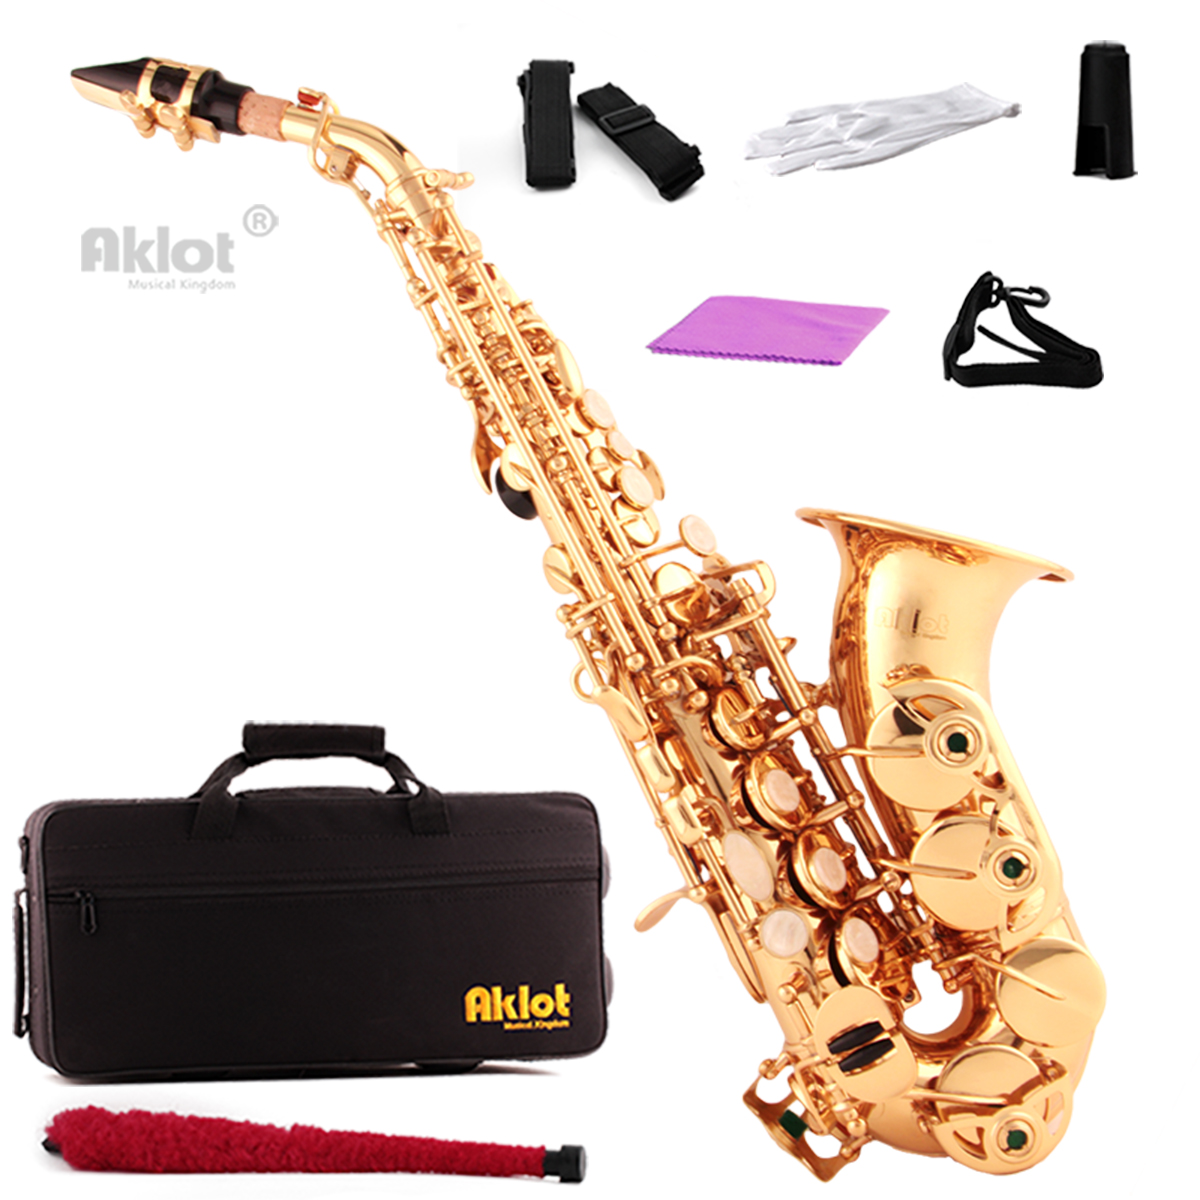 Taruor Soprano Saxophone Bb Brass Lacquered Gold Body and Keys with Gloves Cleaning Cloth 